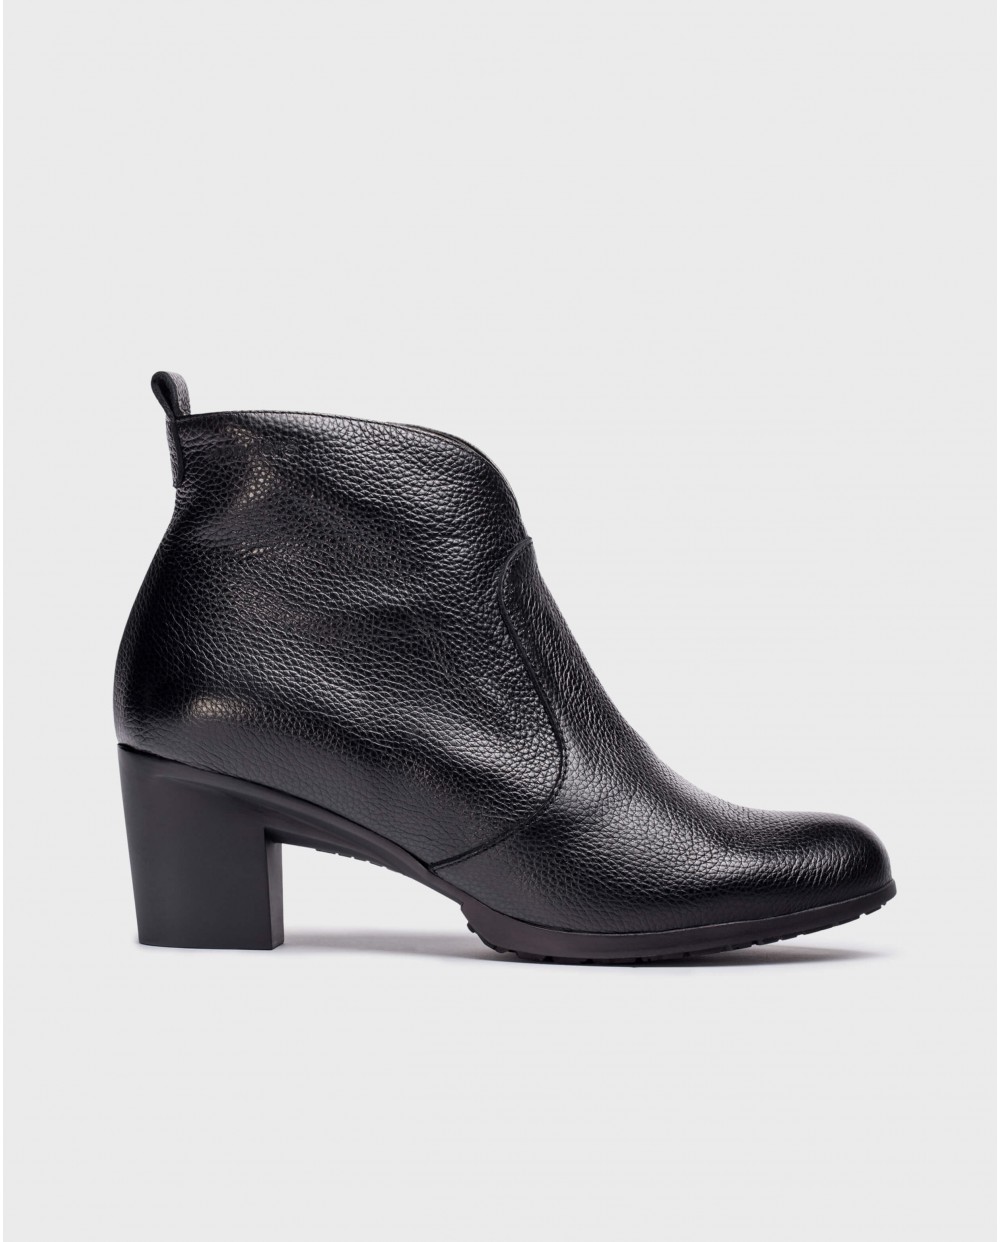 Black textured leather ankle boot